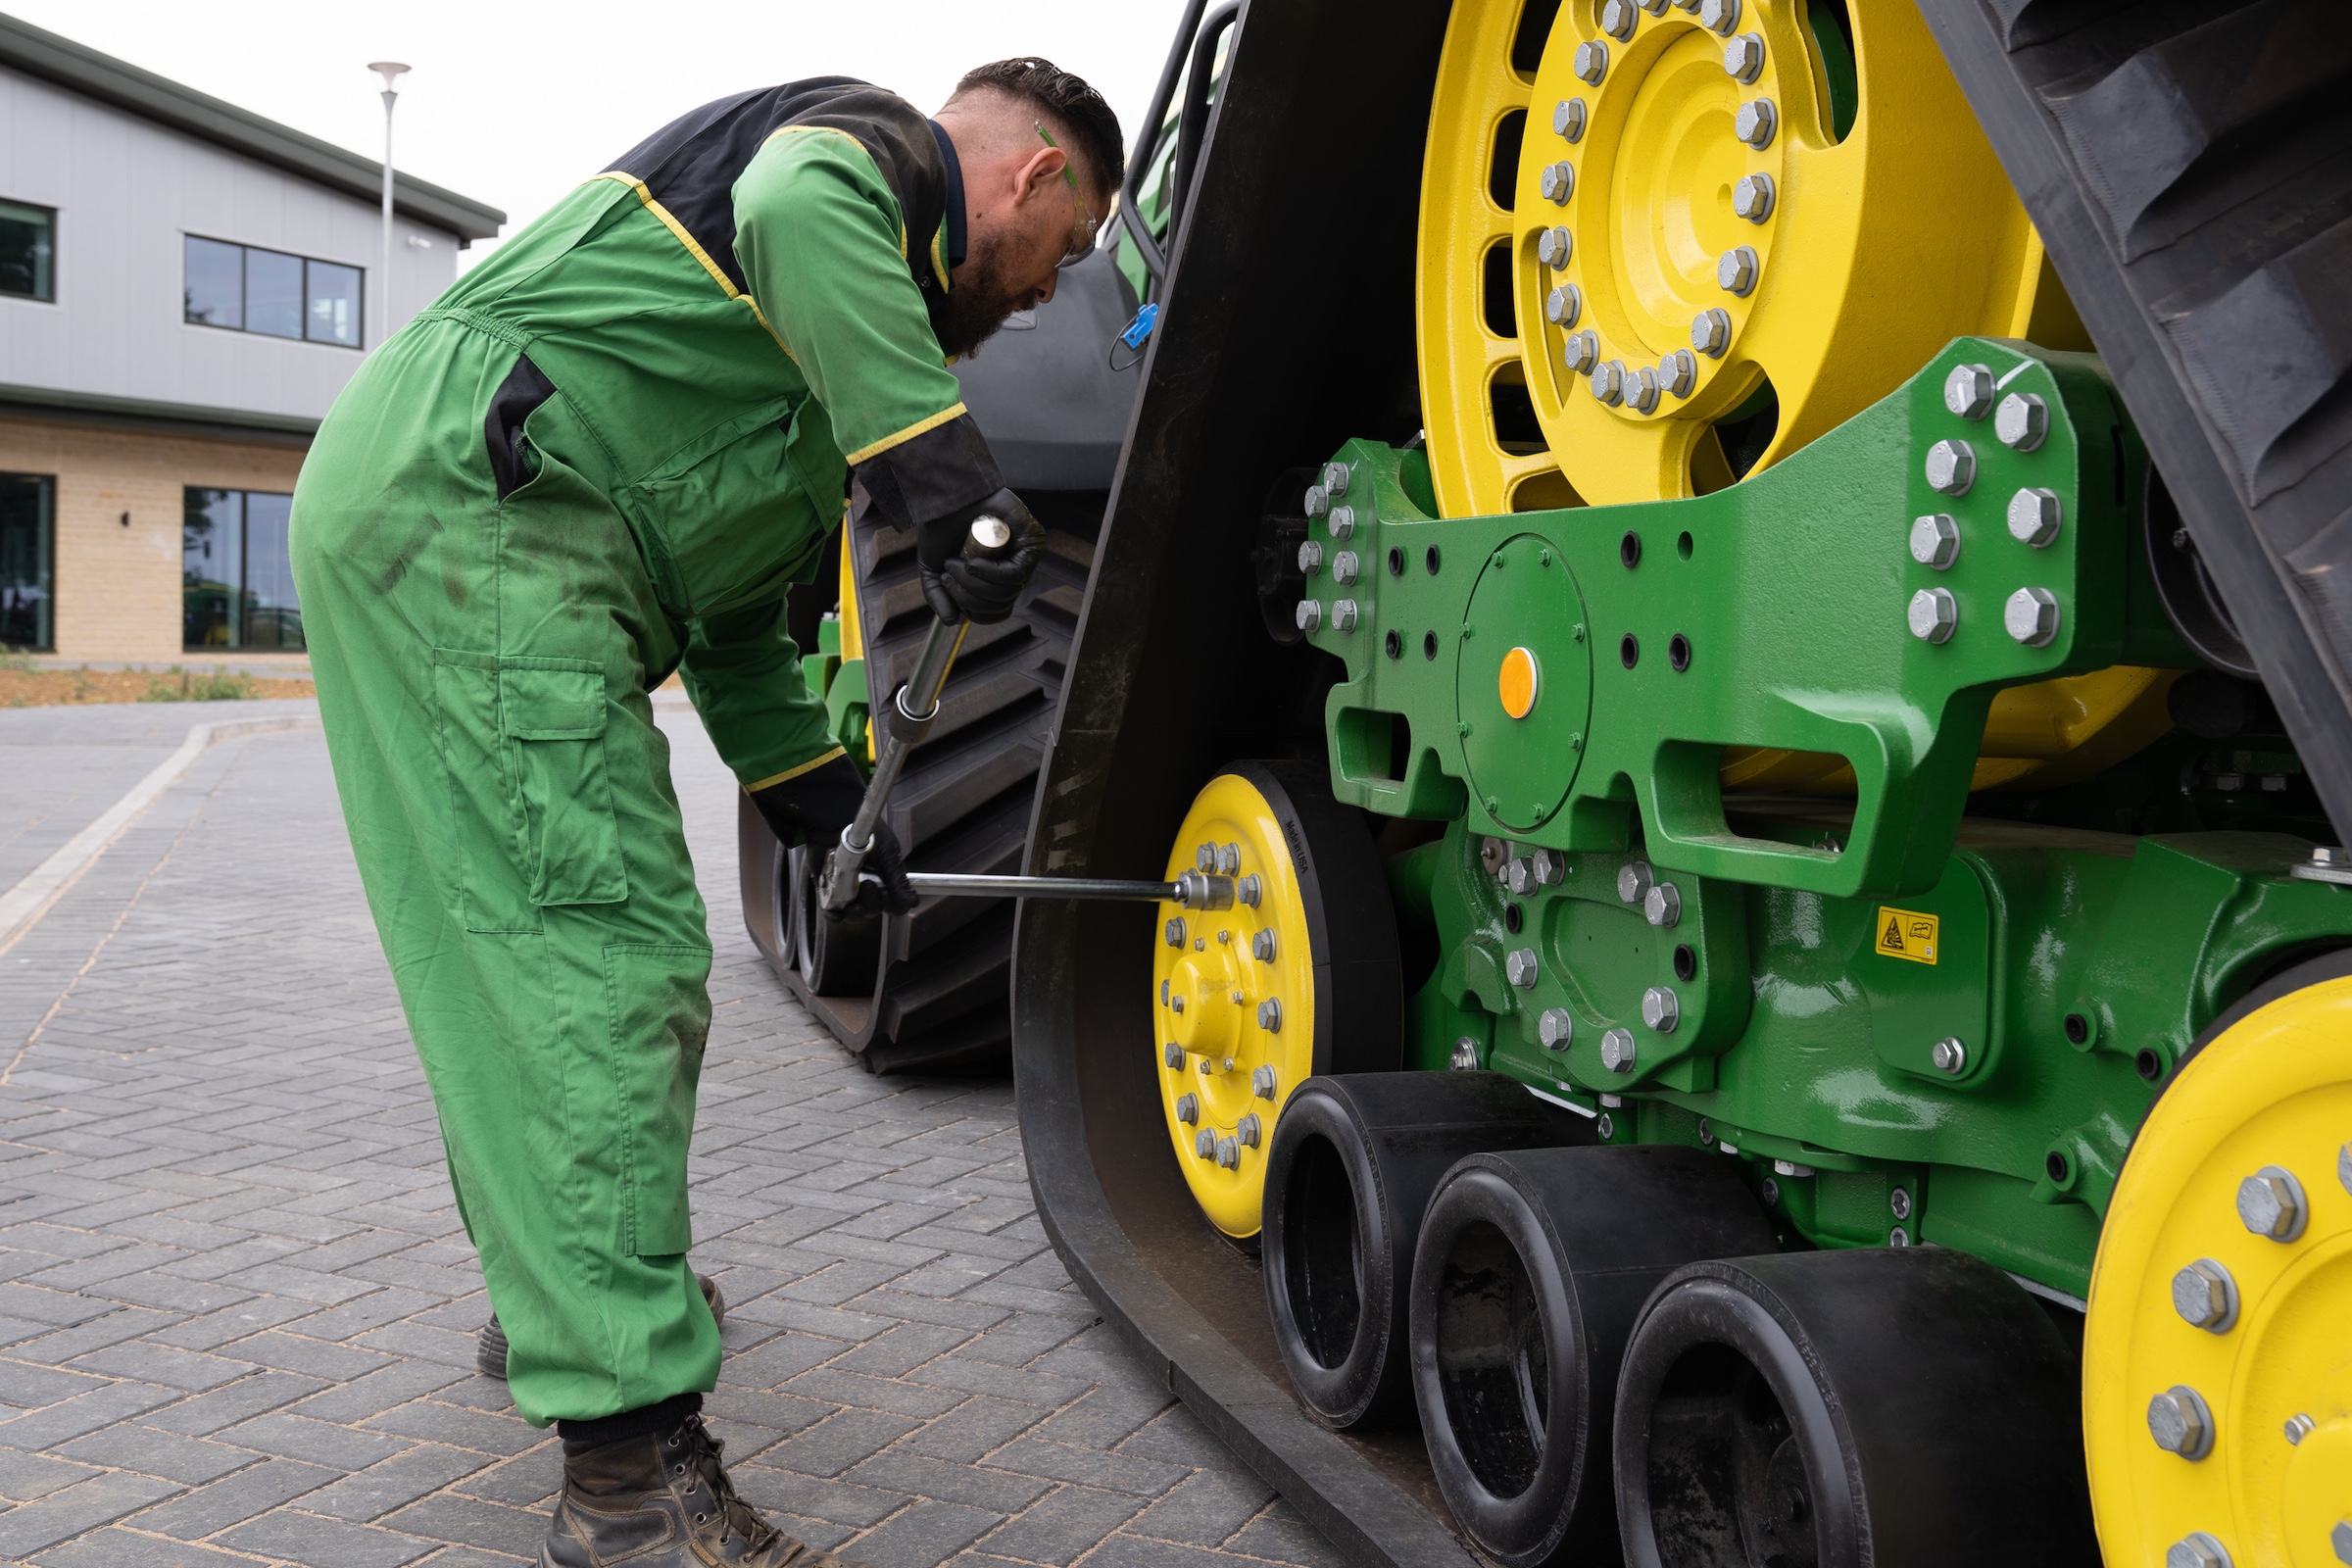 Working on a tracked john deere tractor